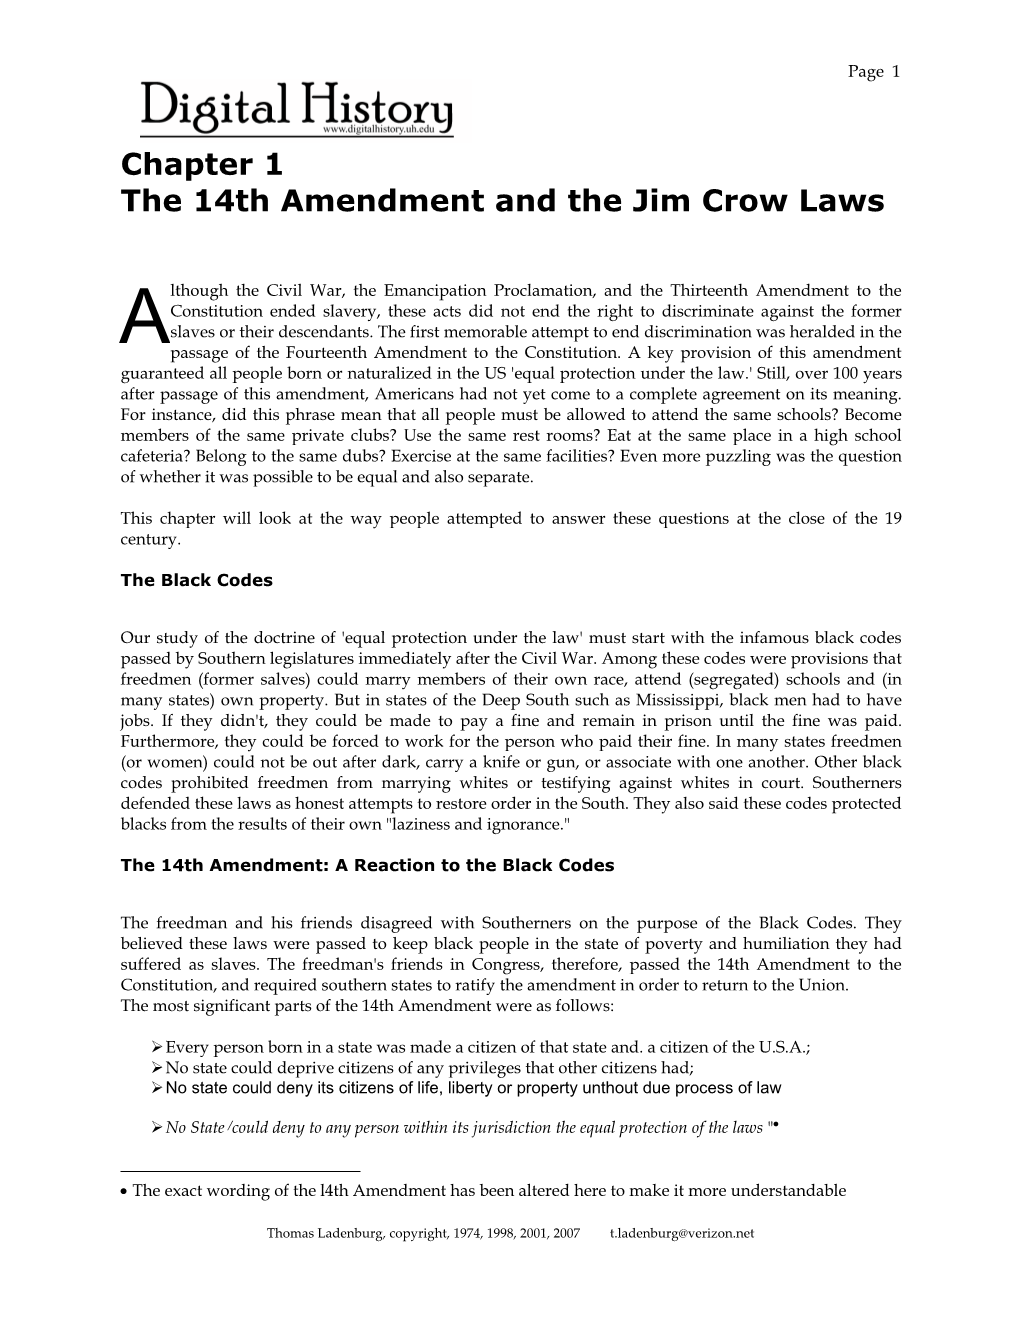 Chapter 1 the 14Th Amendment and the Jim Crow Laws